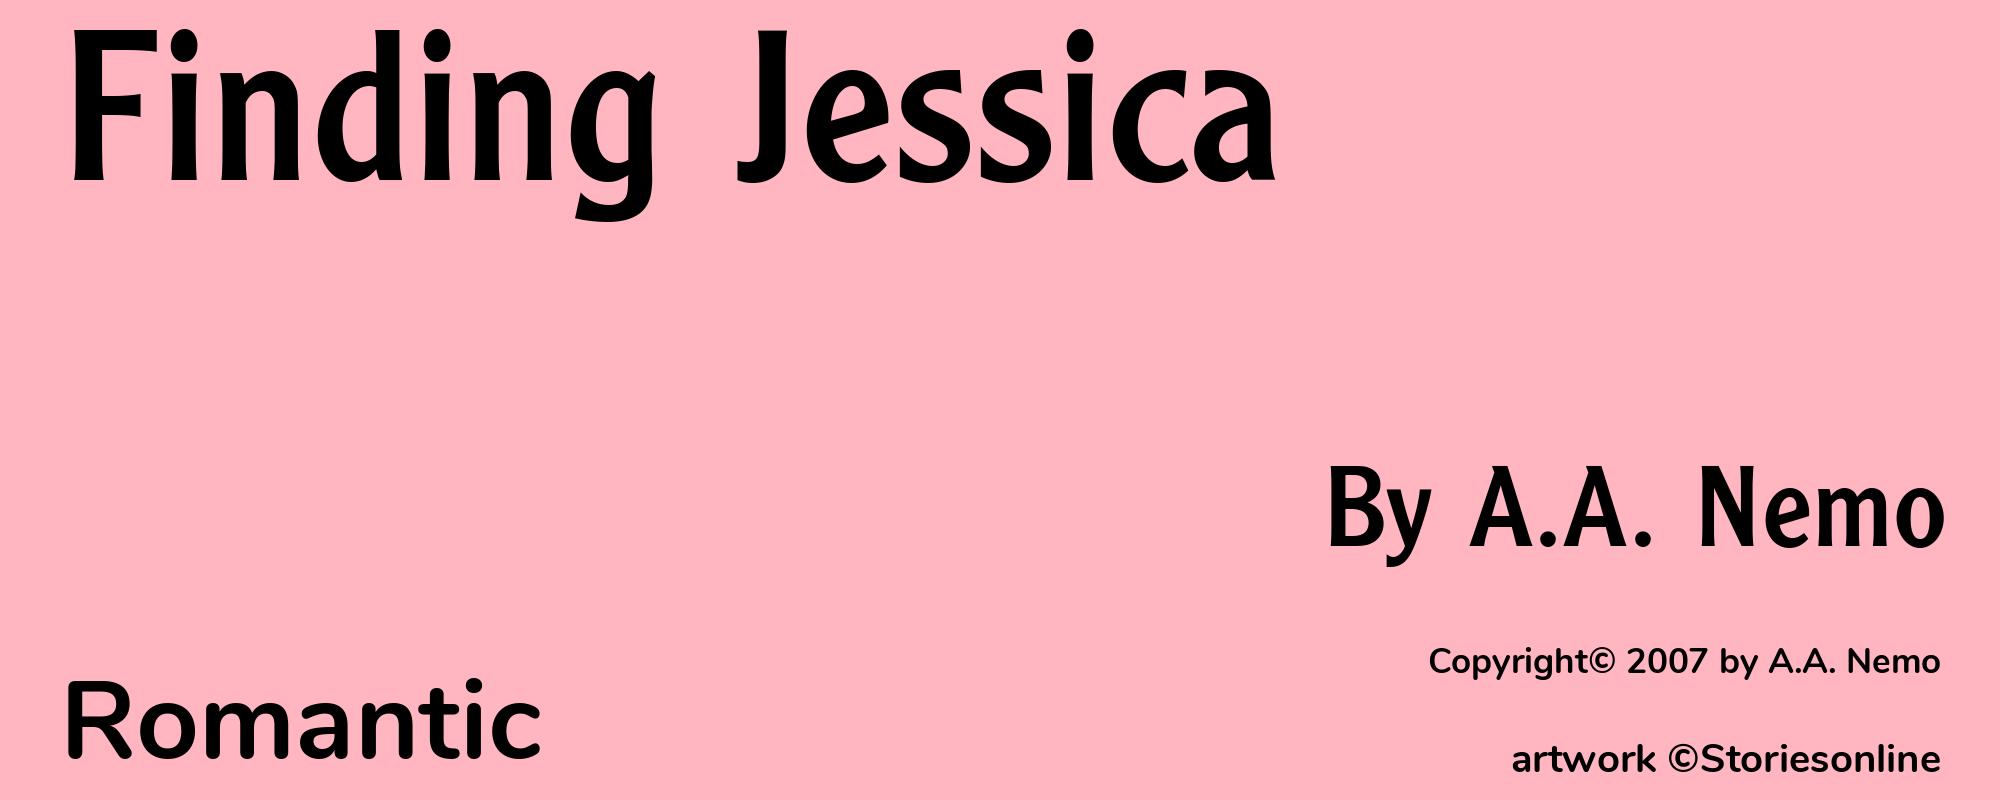 Finding Jessica - Cover